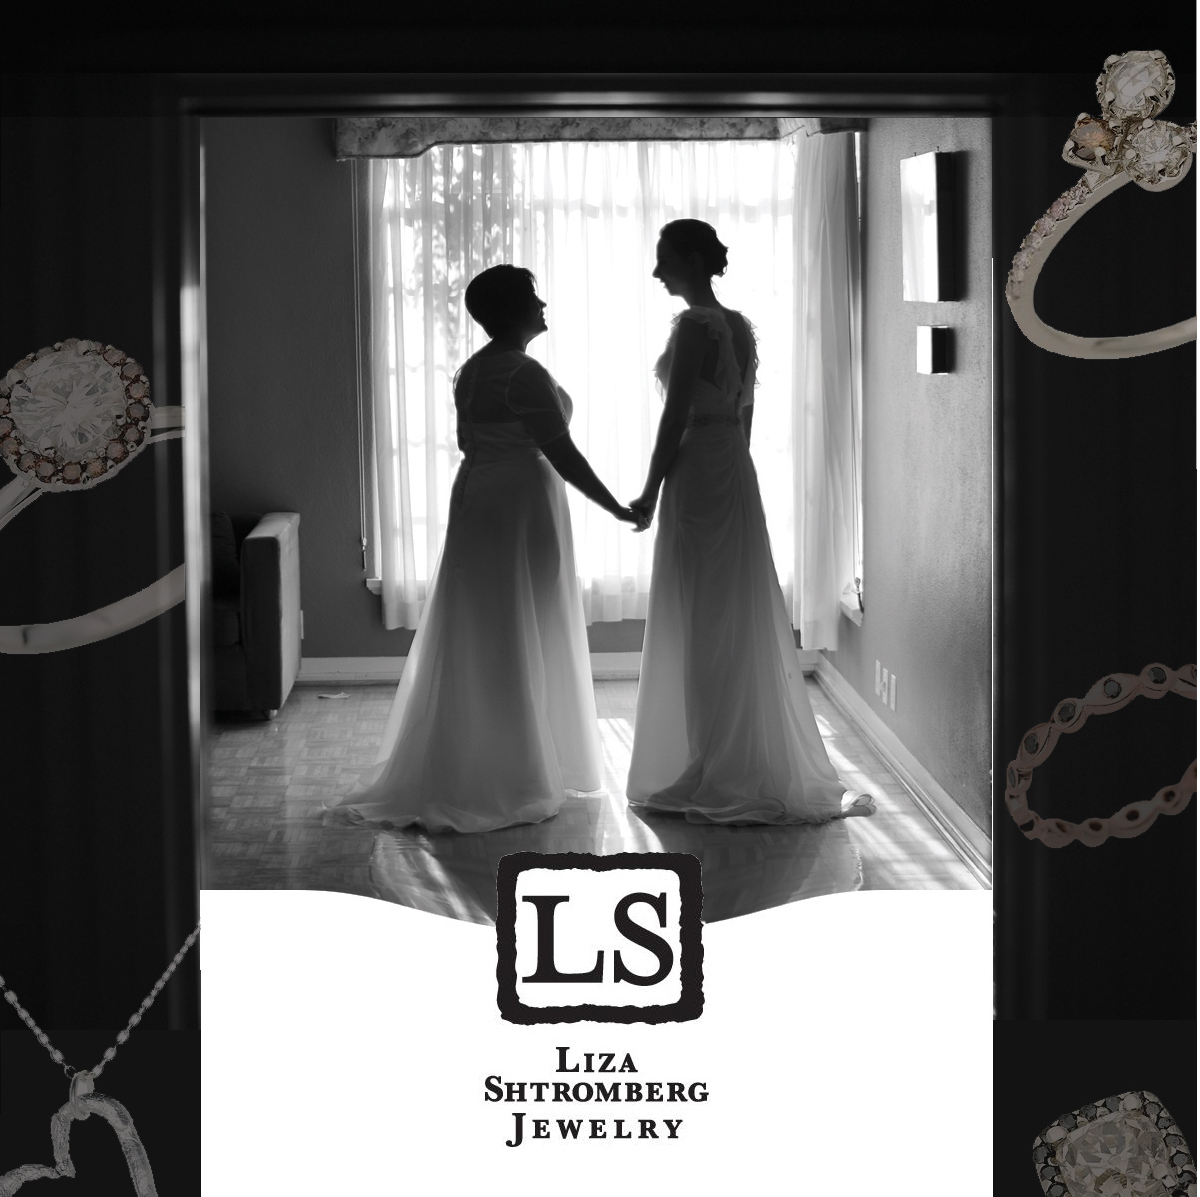 Join us for Ladies Night on July 8th at LS Jewelry Store in Los Feliz!